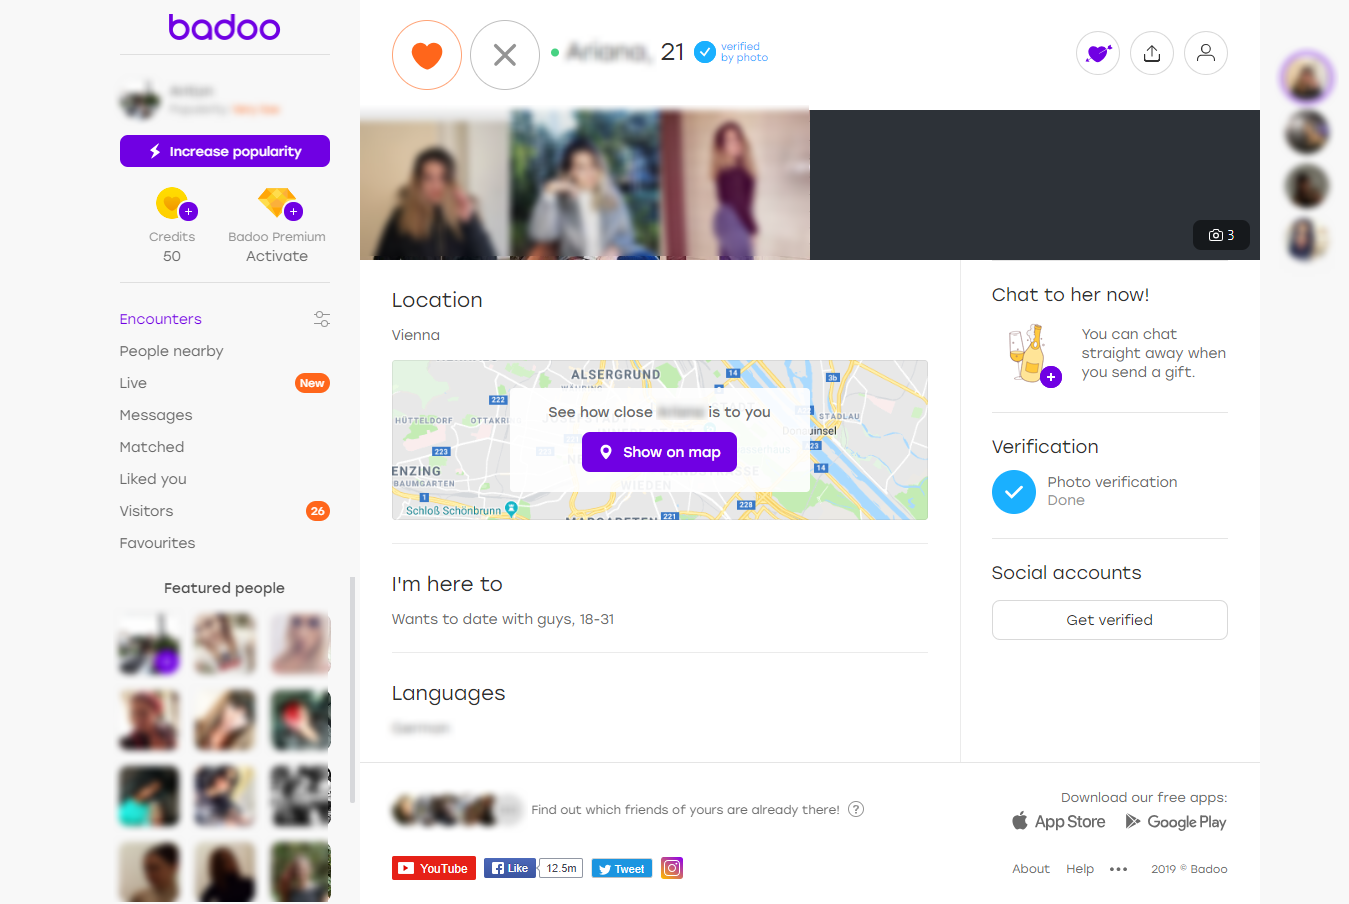 Badoo — The Dating App to Chat, Date & Meet People